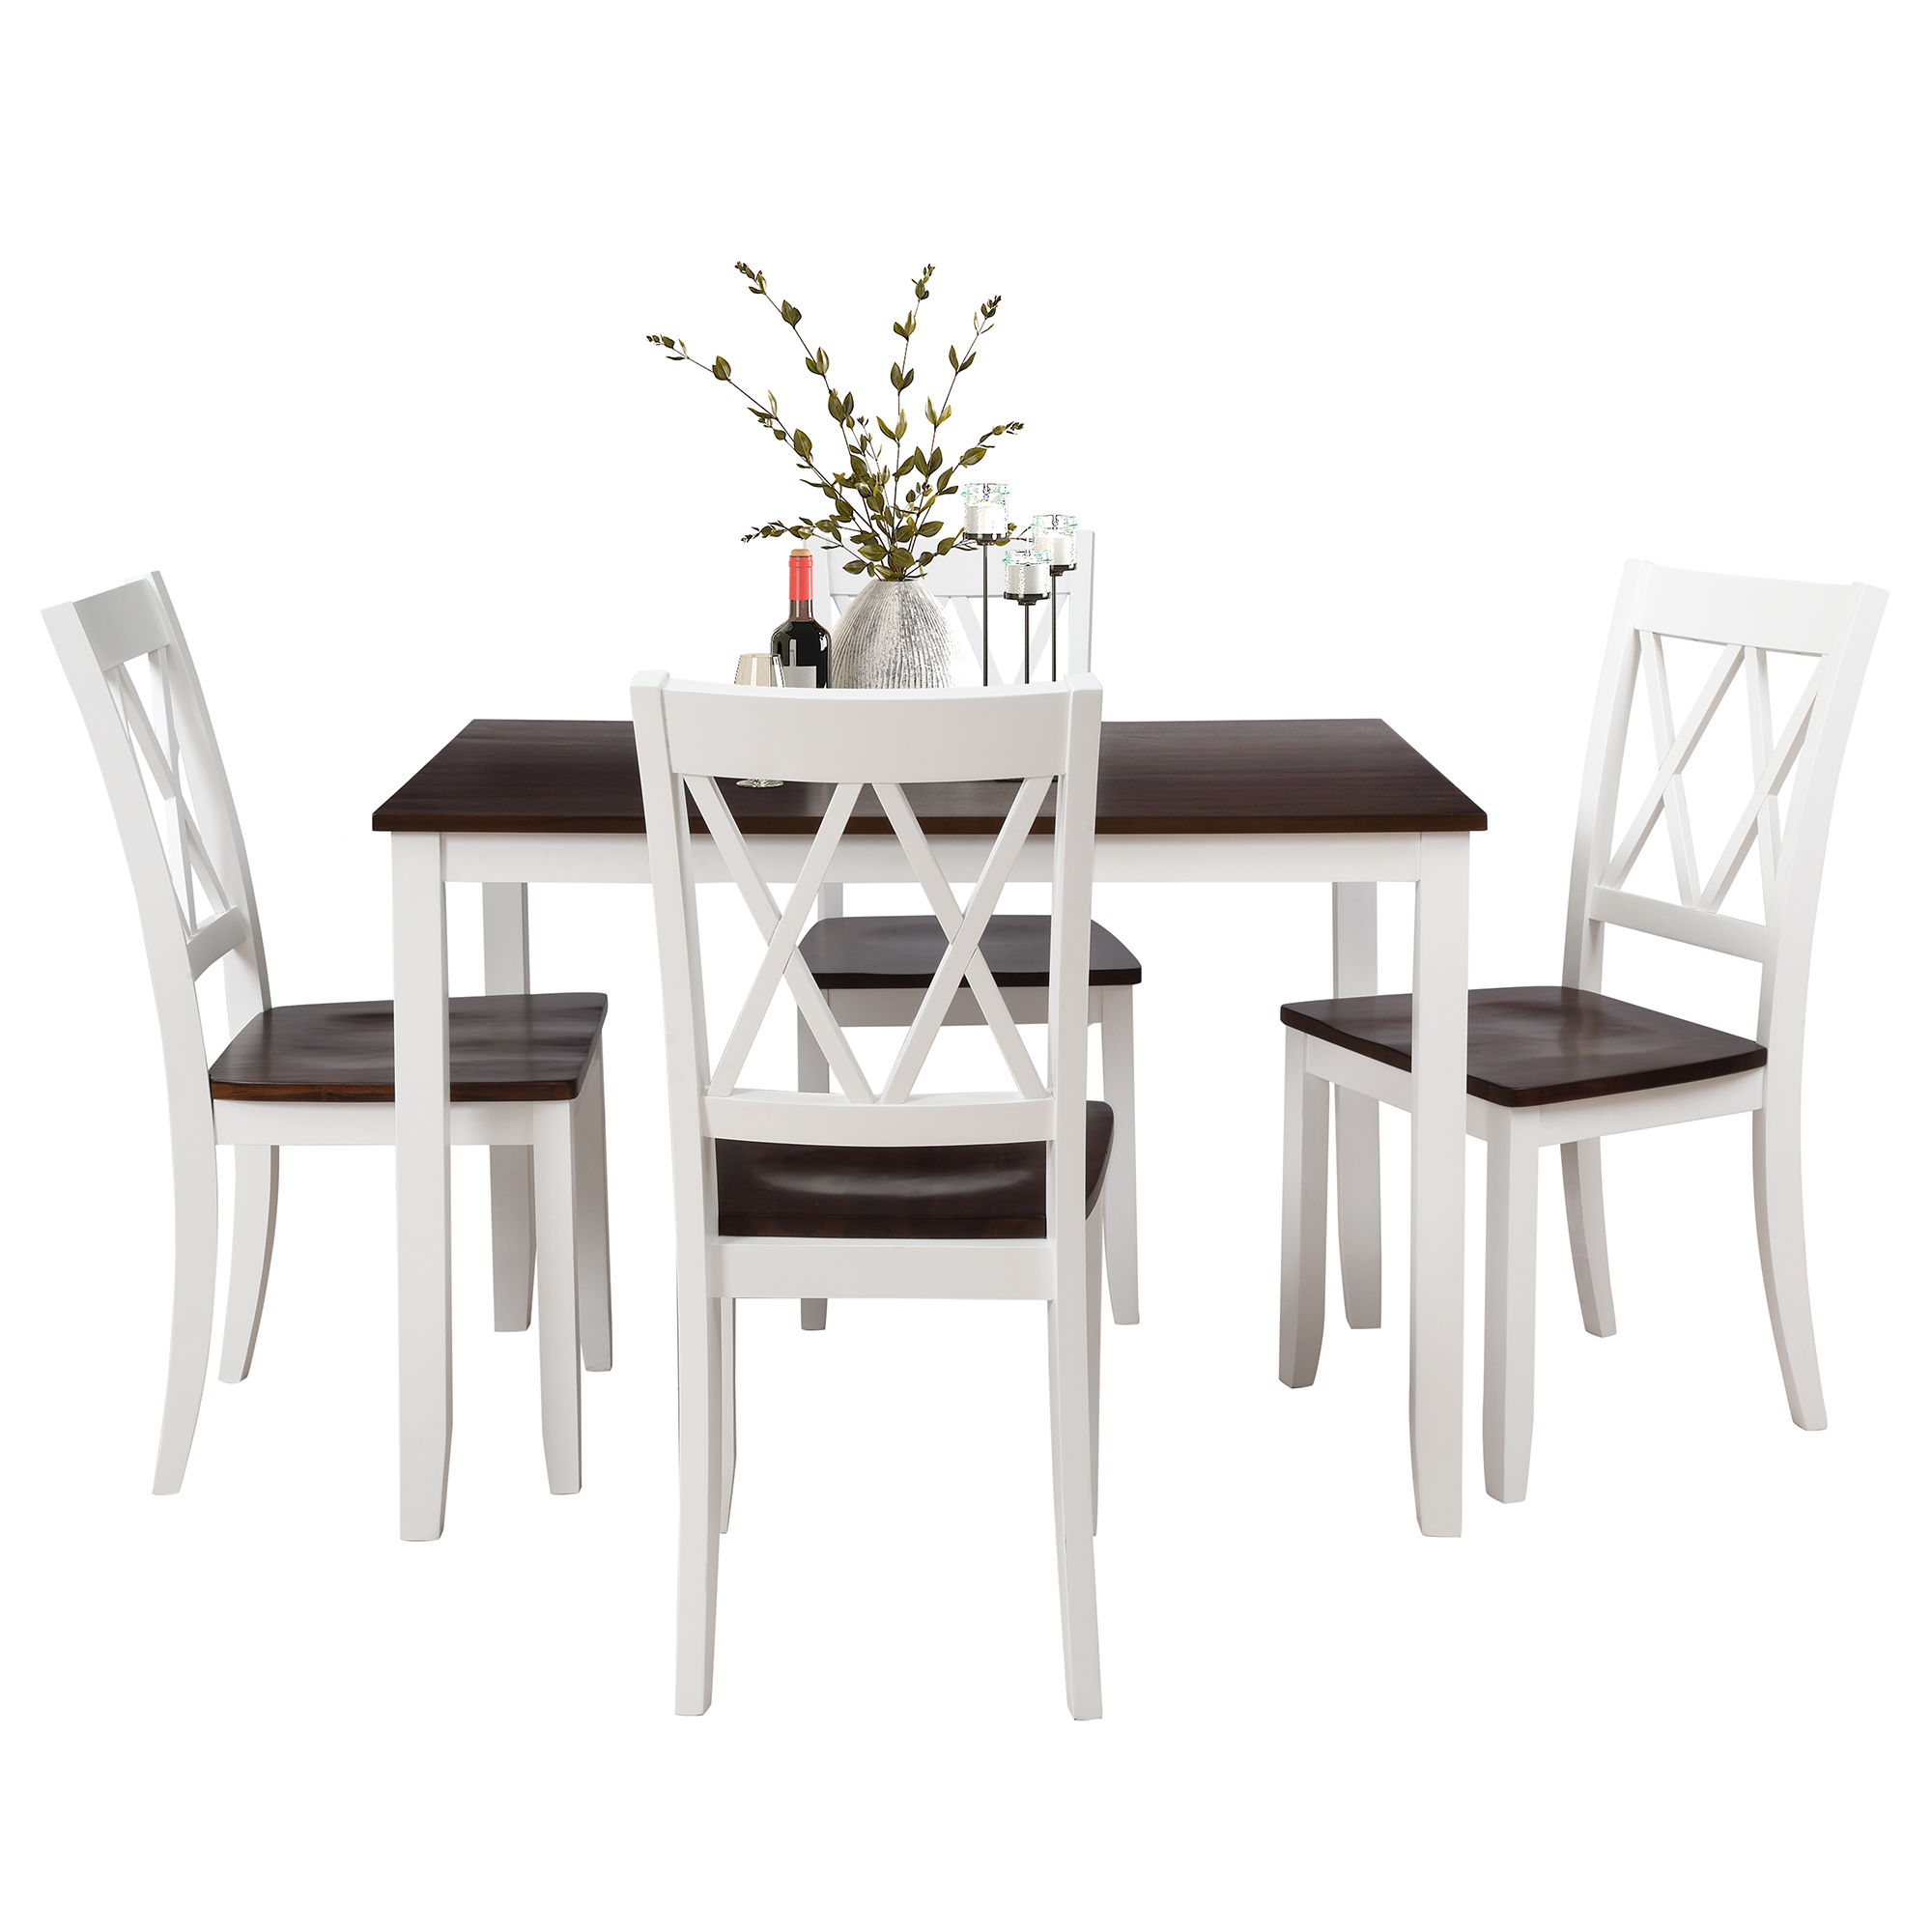  5-Piece Dining Table Set Home Kitchen Table and Chairs Wood Dining Set (White+Cherry)-CASAINC